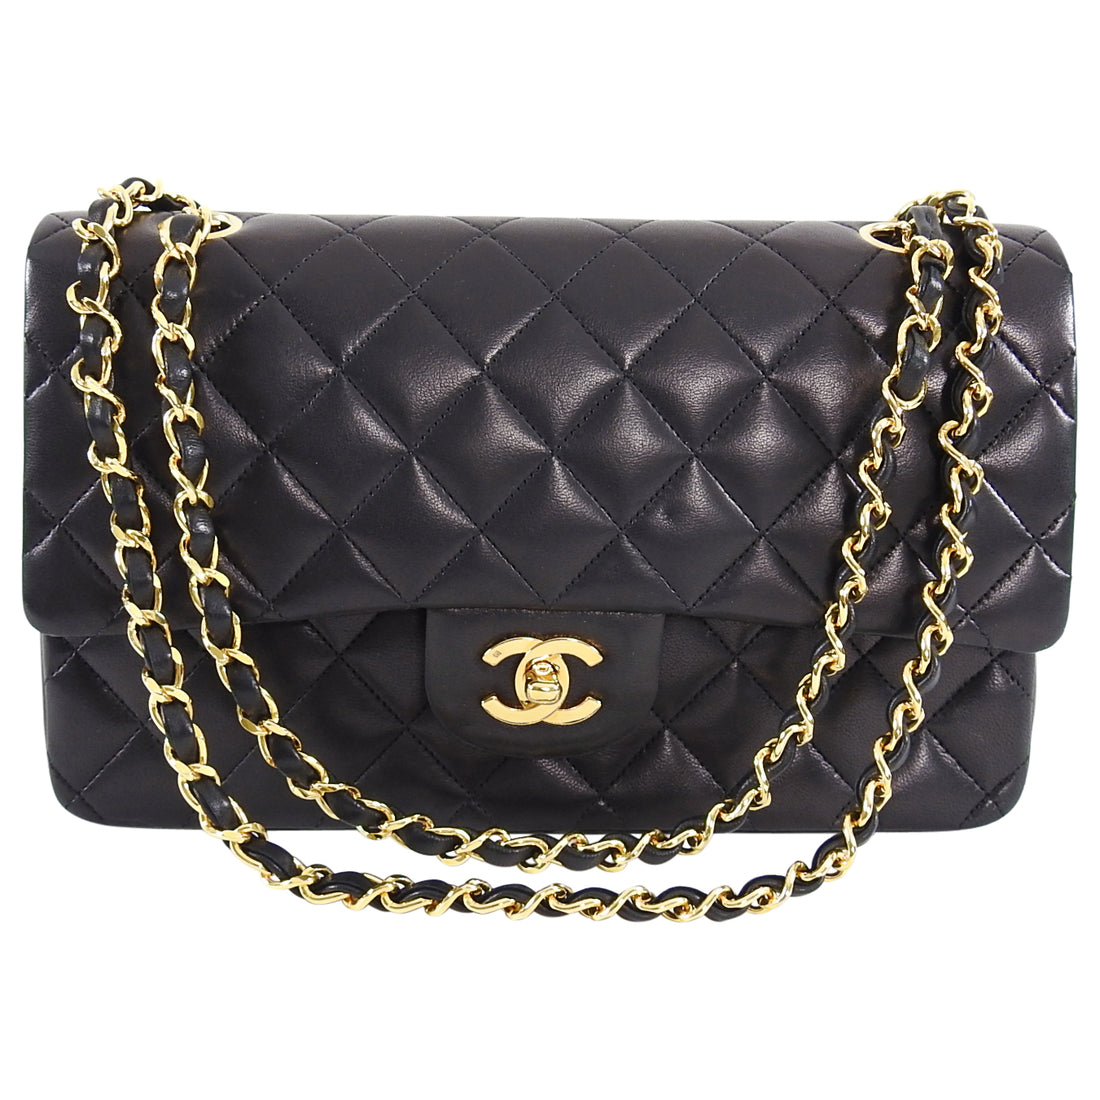 Outfit with Black Chanel Caviar Classic Jumbo Flap Bag - Lollipuff